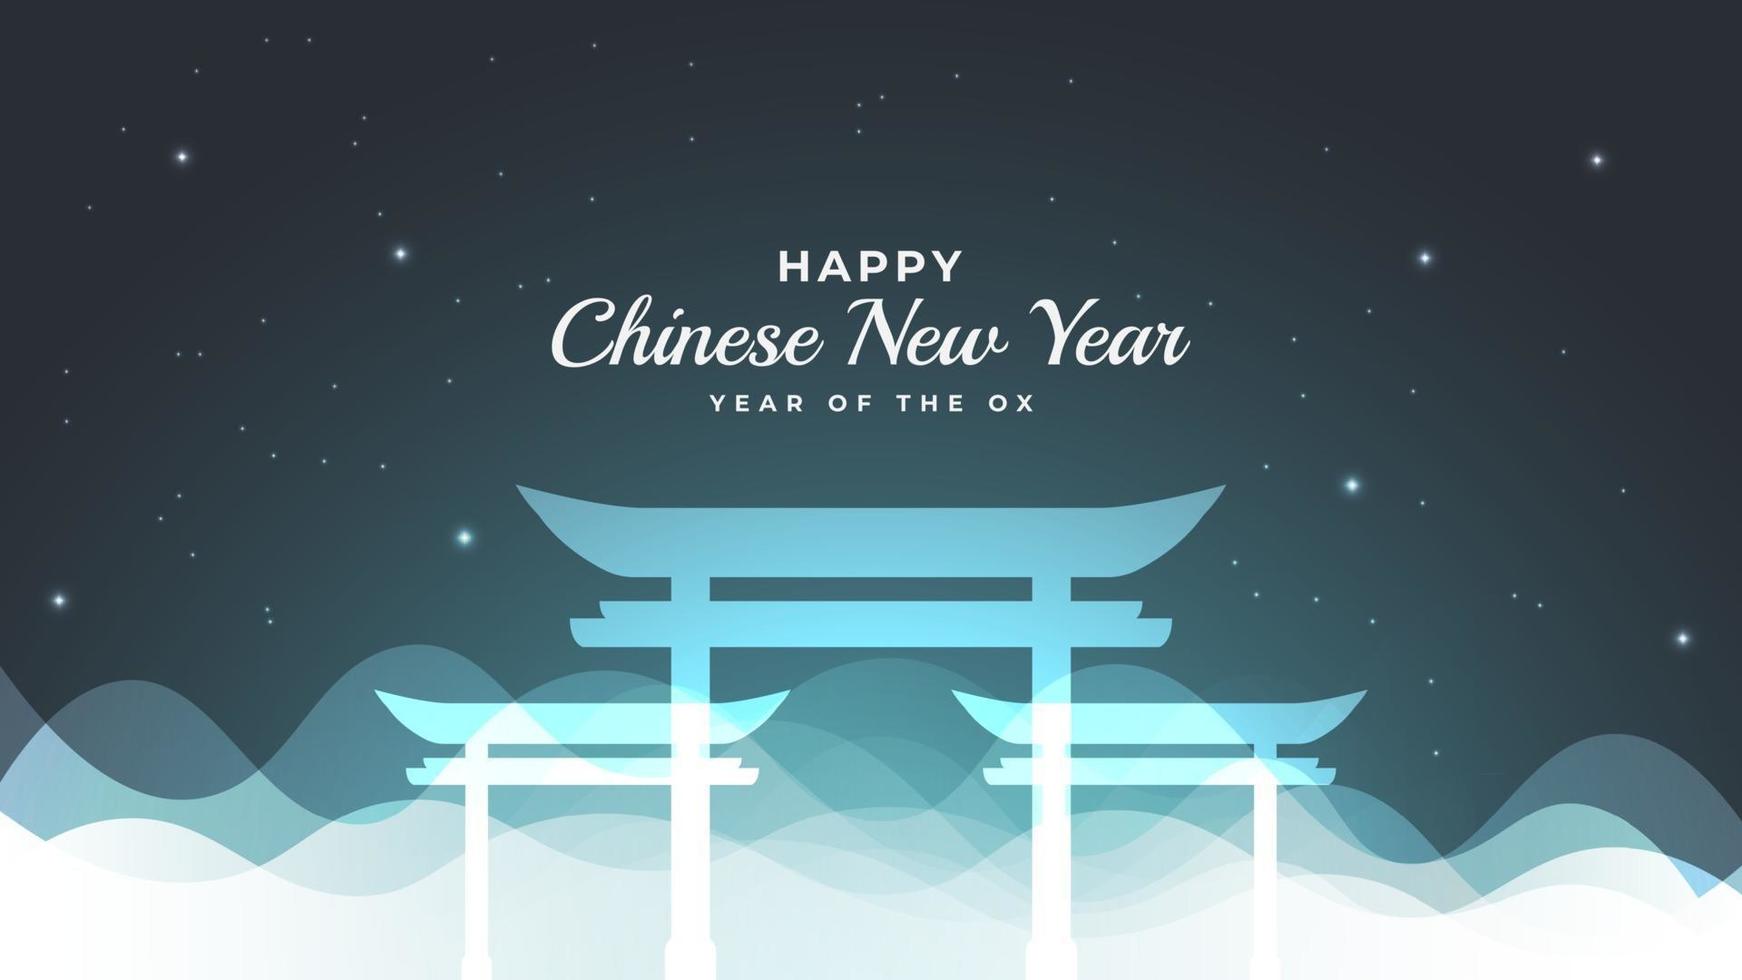 Happy Chinese New Year 2021 banner or poster with silhouette of gate and fog on starry blue background vector